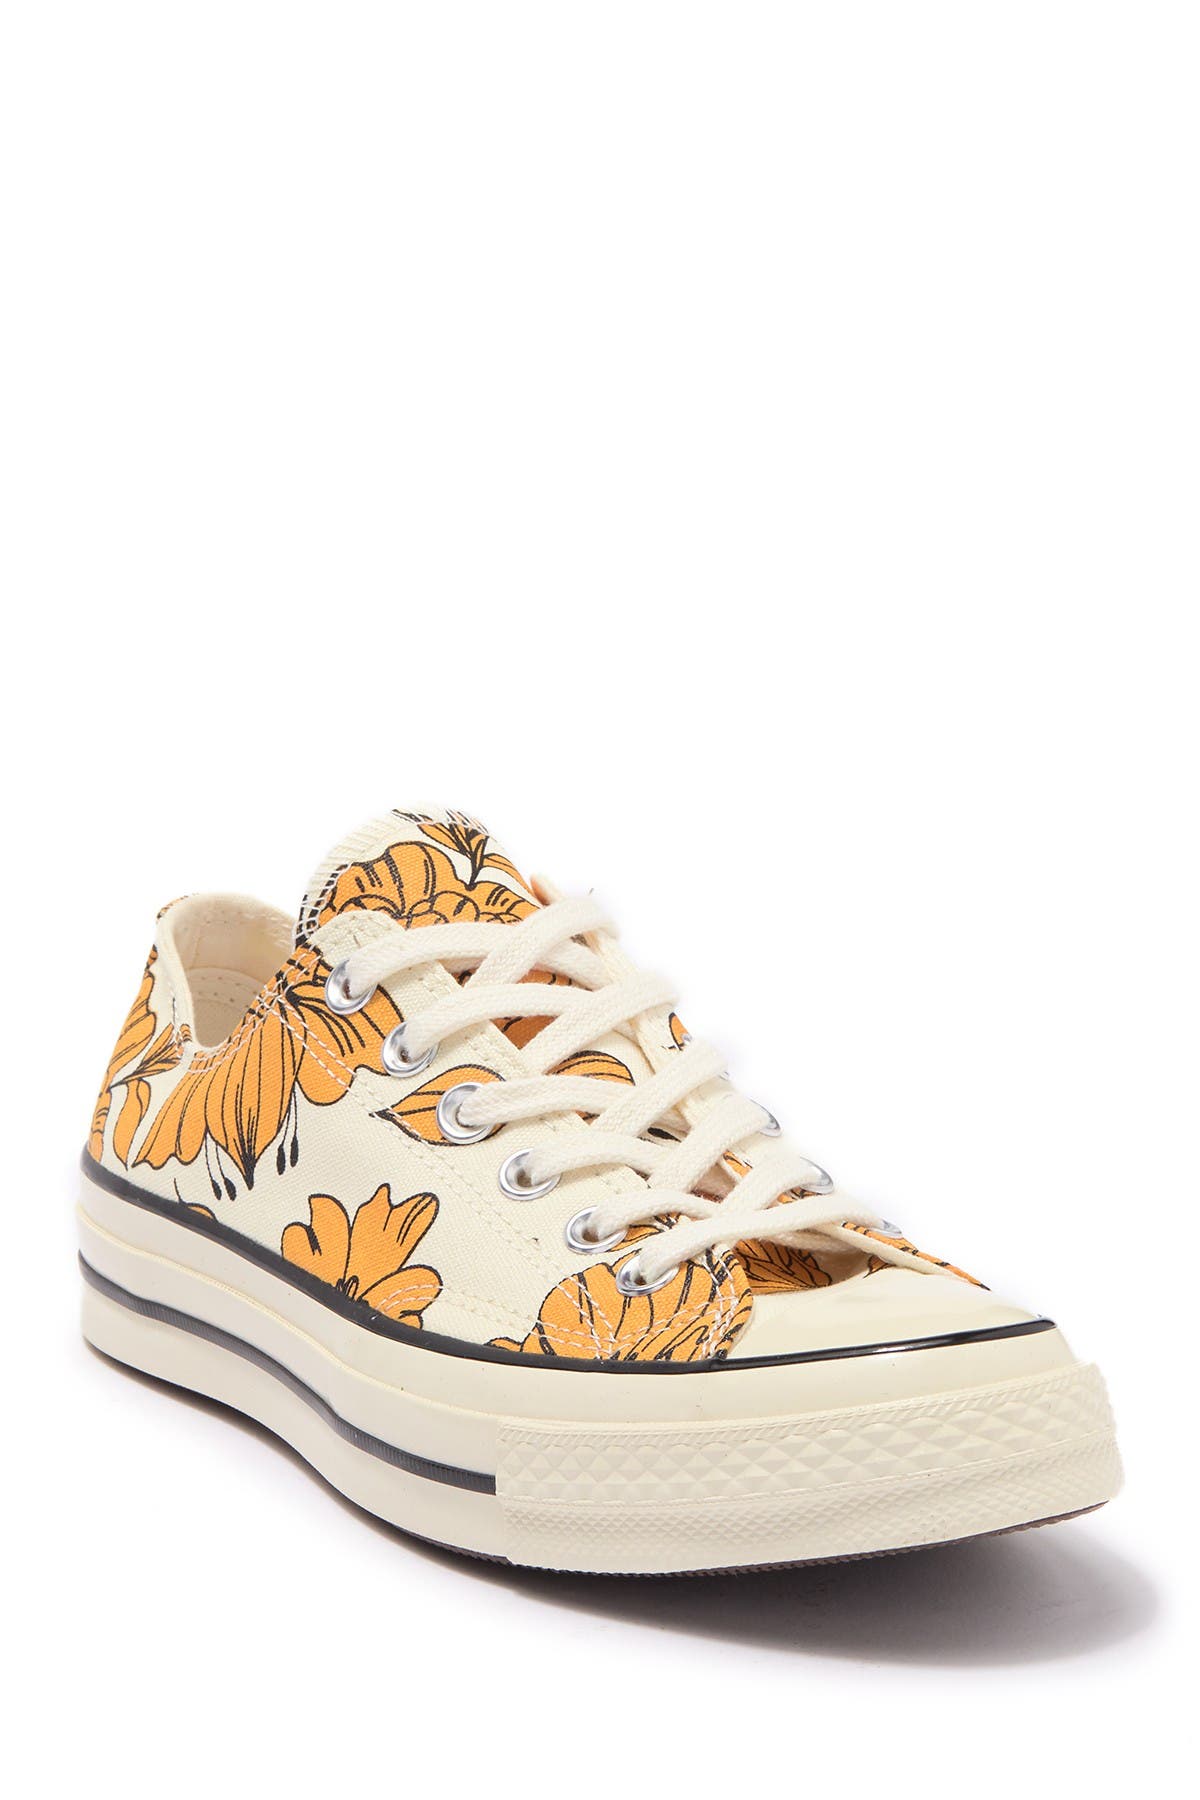 sunflower converse sneakers